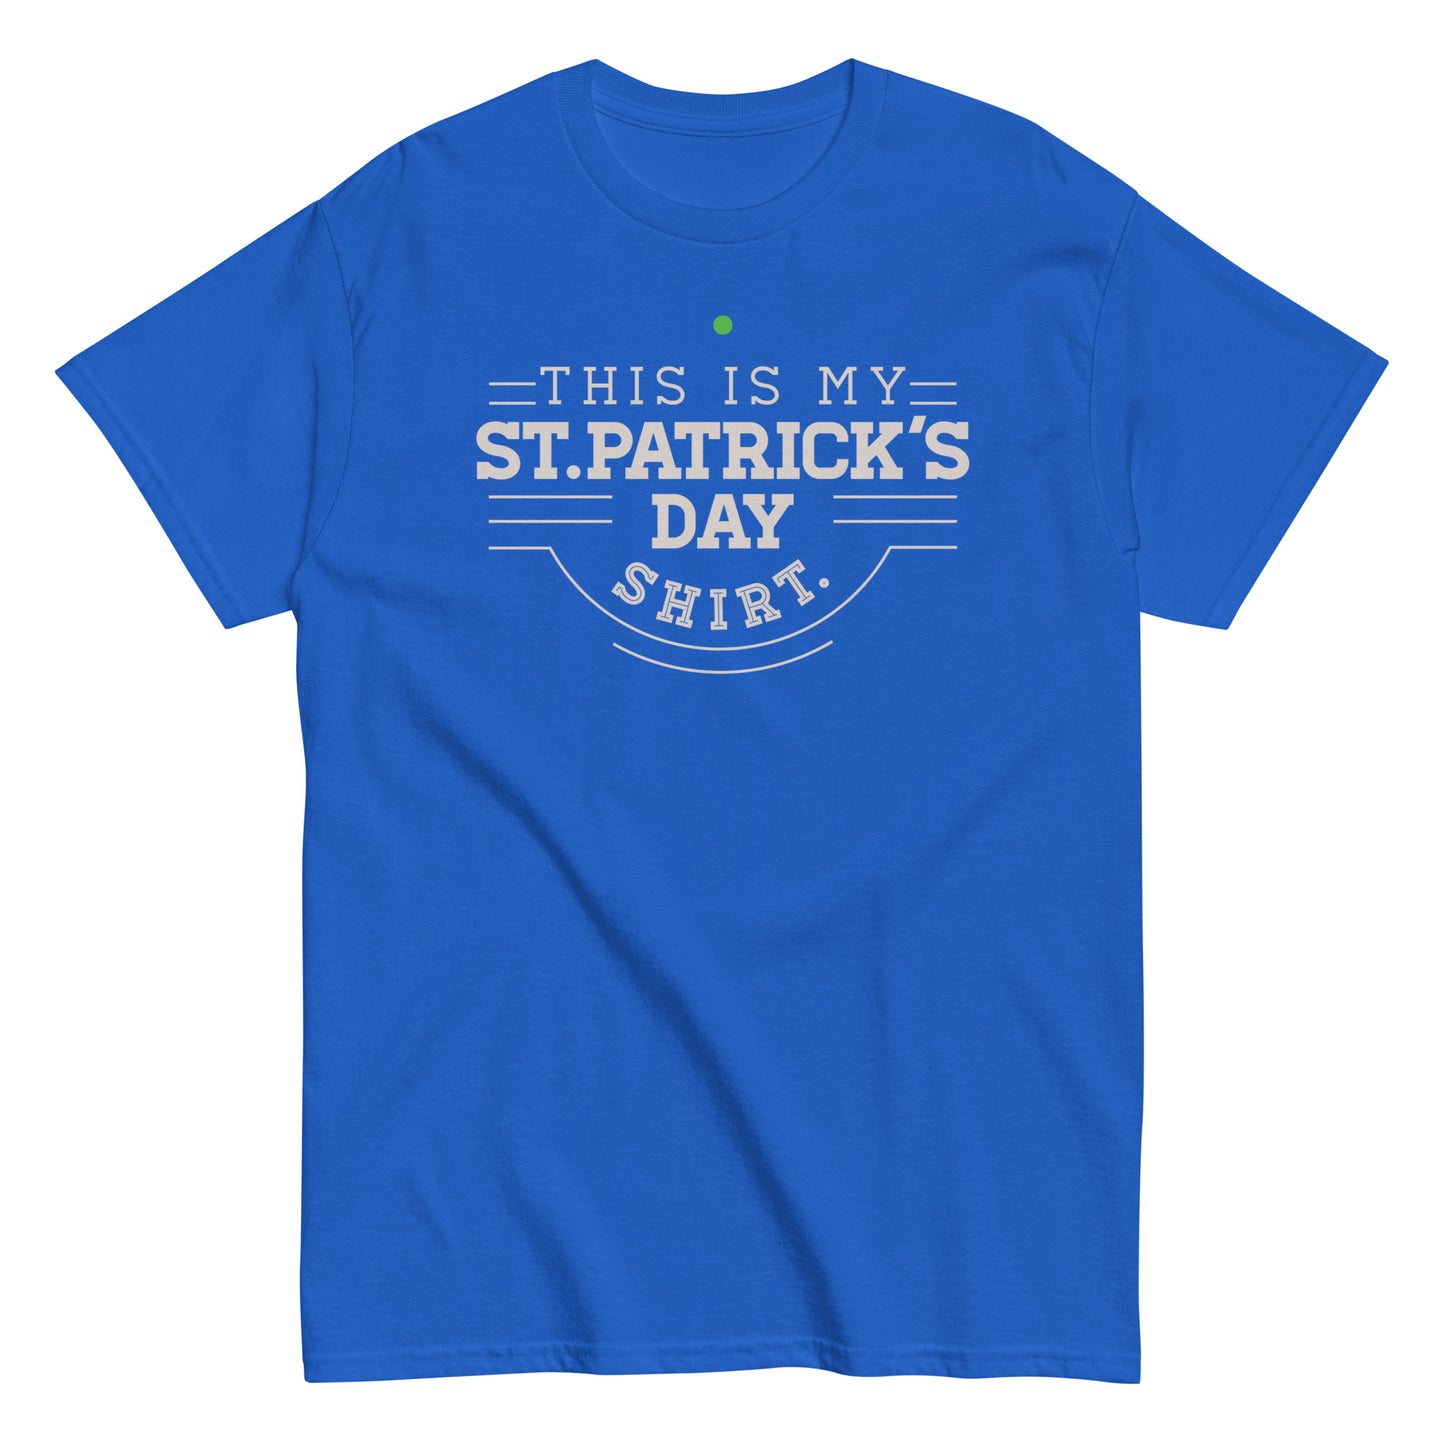 This Is My St. Patrick's Day Shirt Men's Classic Tee